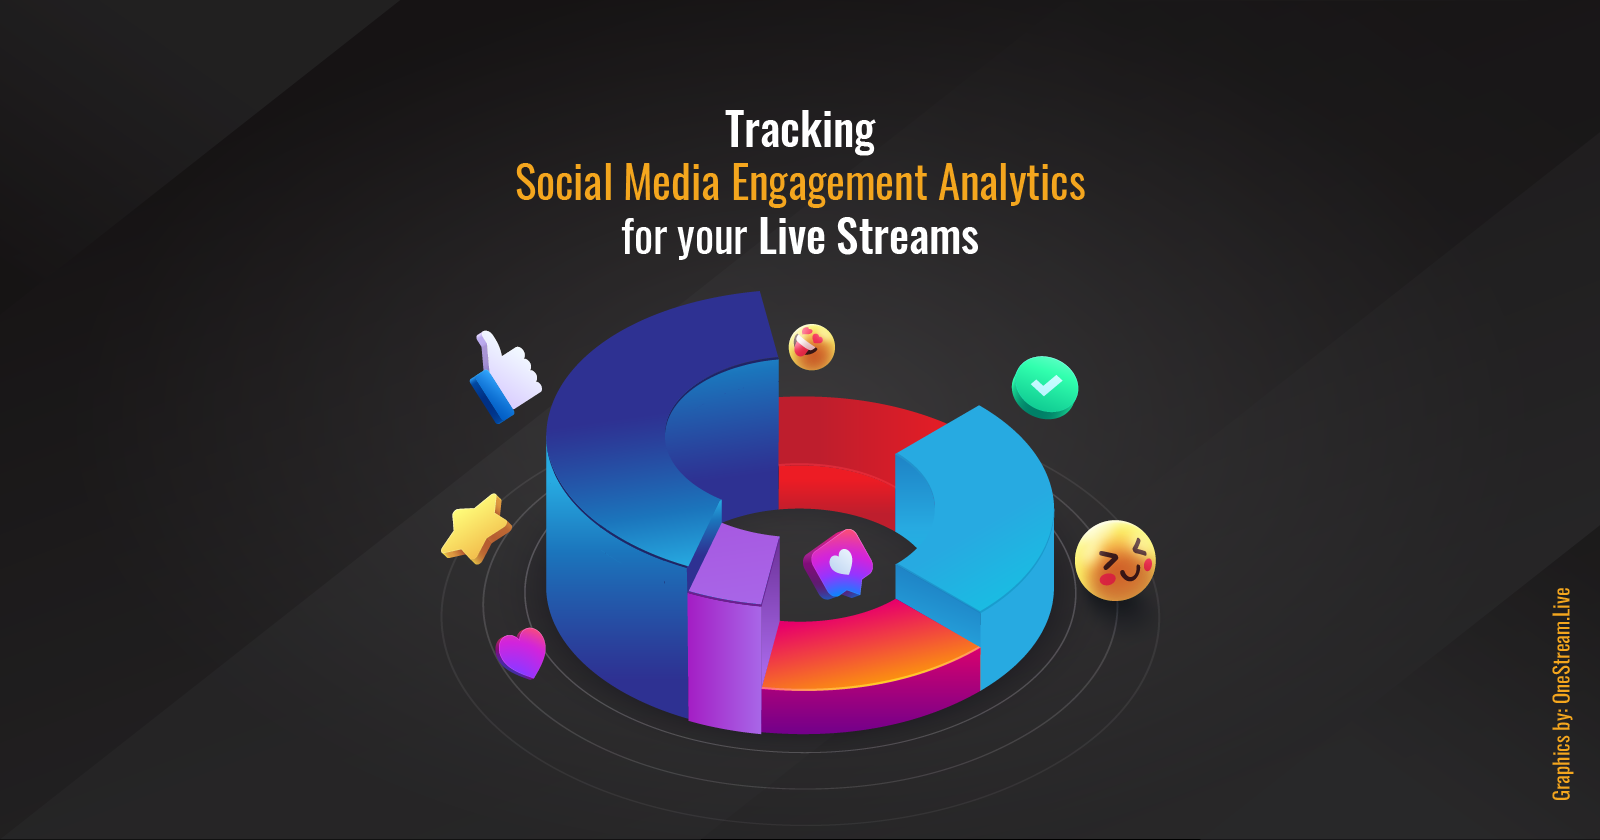 Tracking Social Media Engagement Analytics for your Live Streams